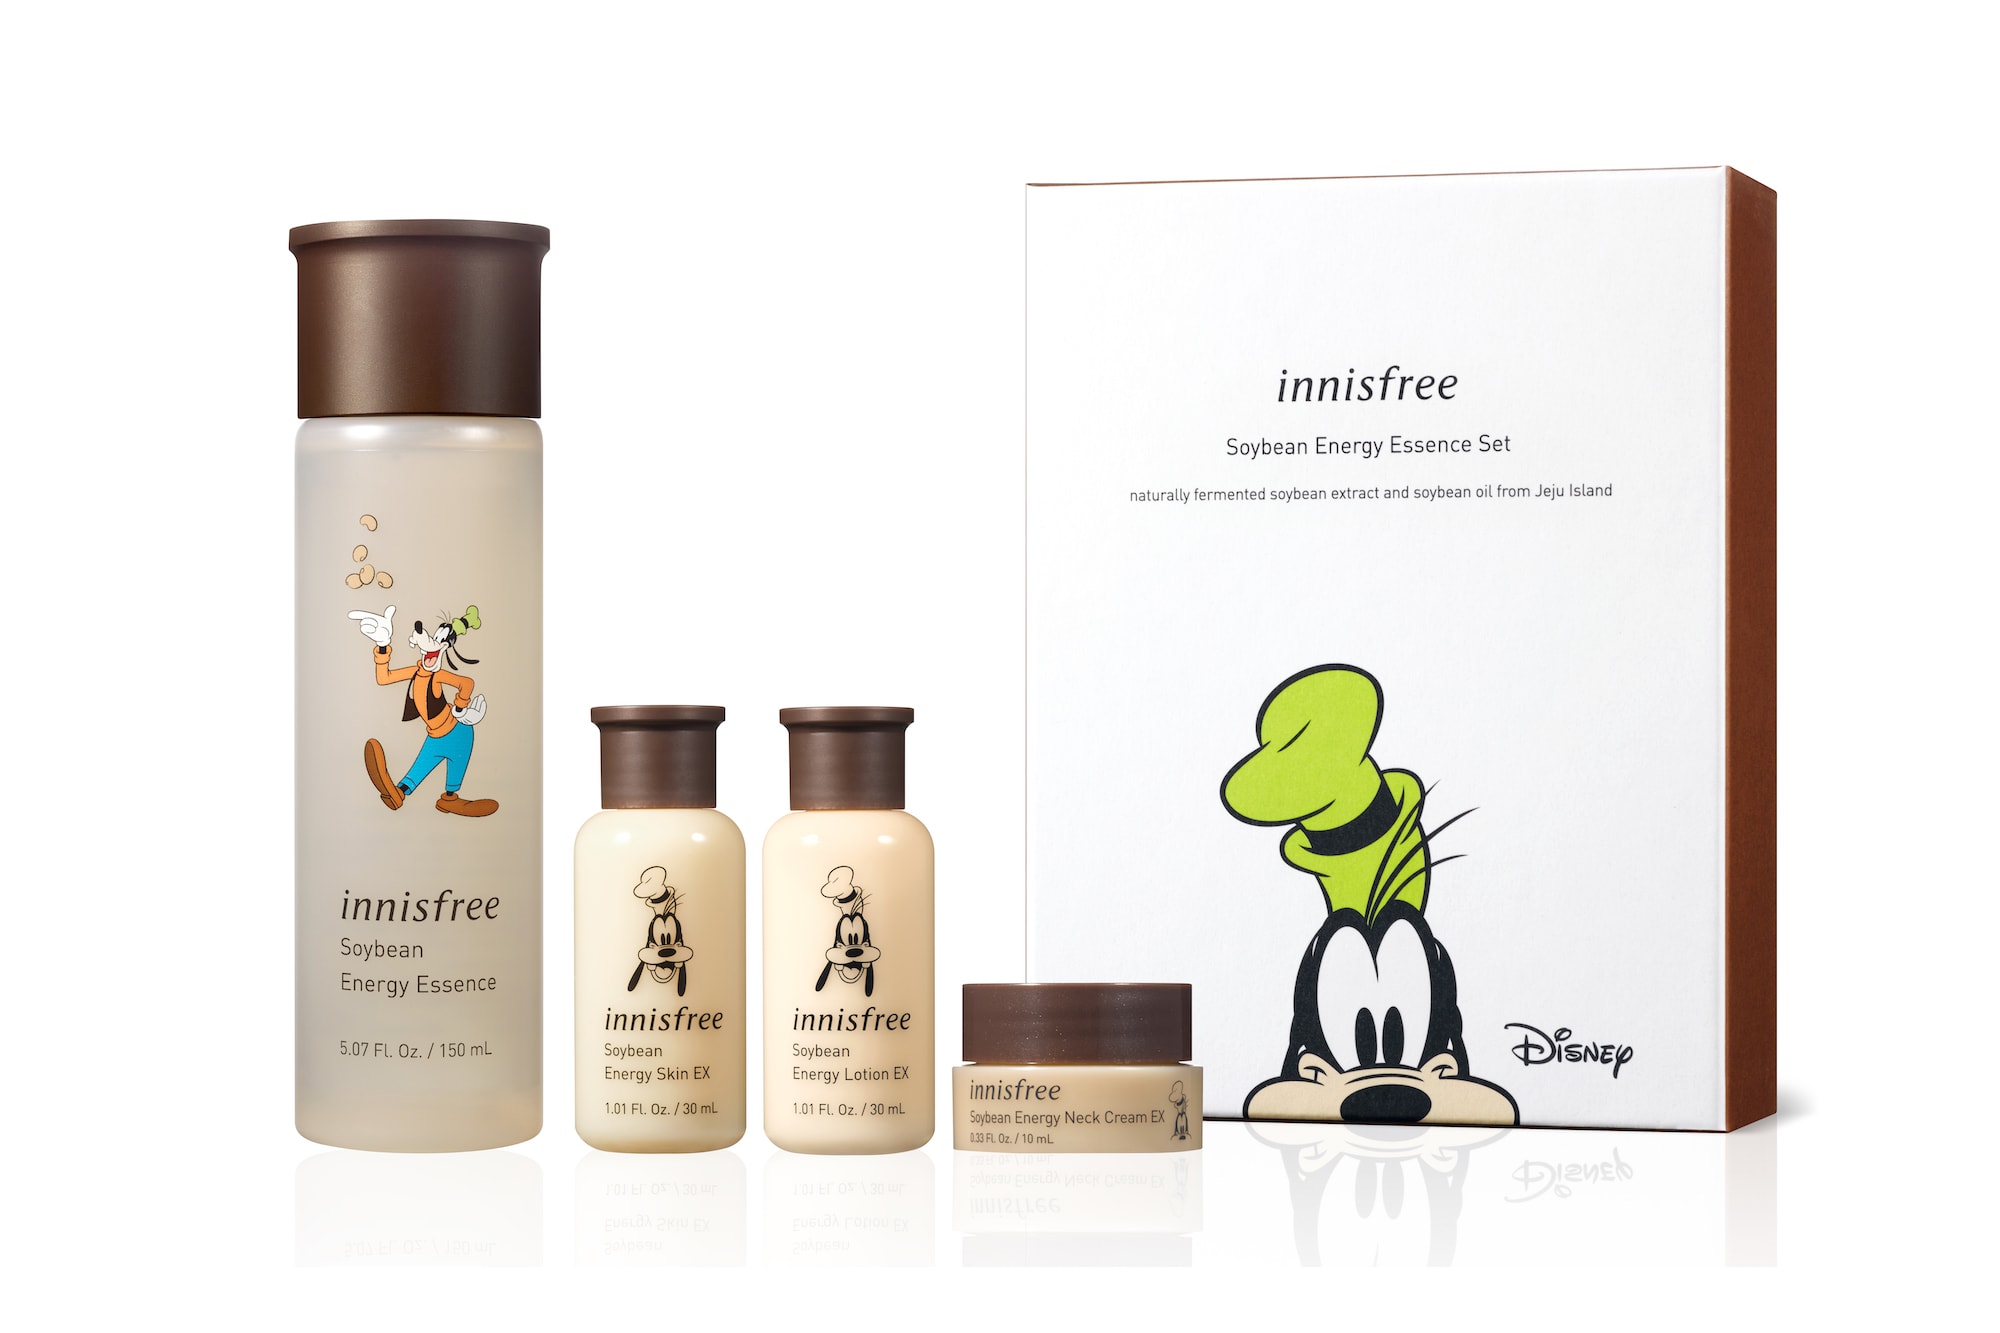 Innisfree Disney Skincare Beauty Makeup Collection K-Beauty Lip Balm Mirror Donald Duck Mickey Minnie Mouse